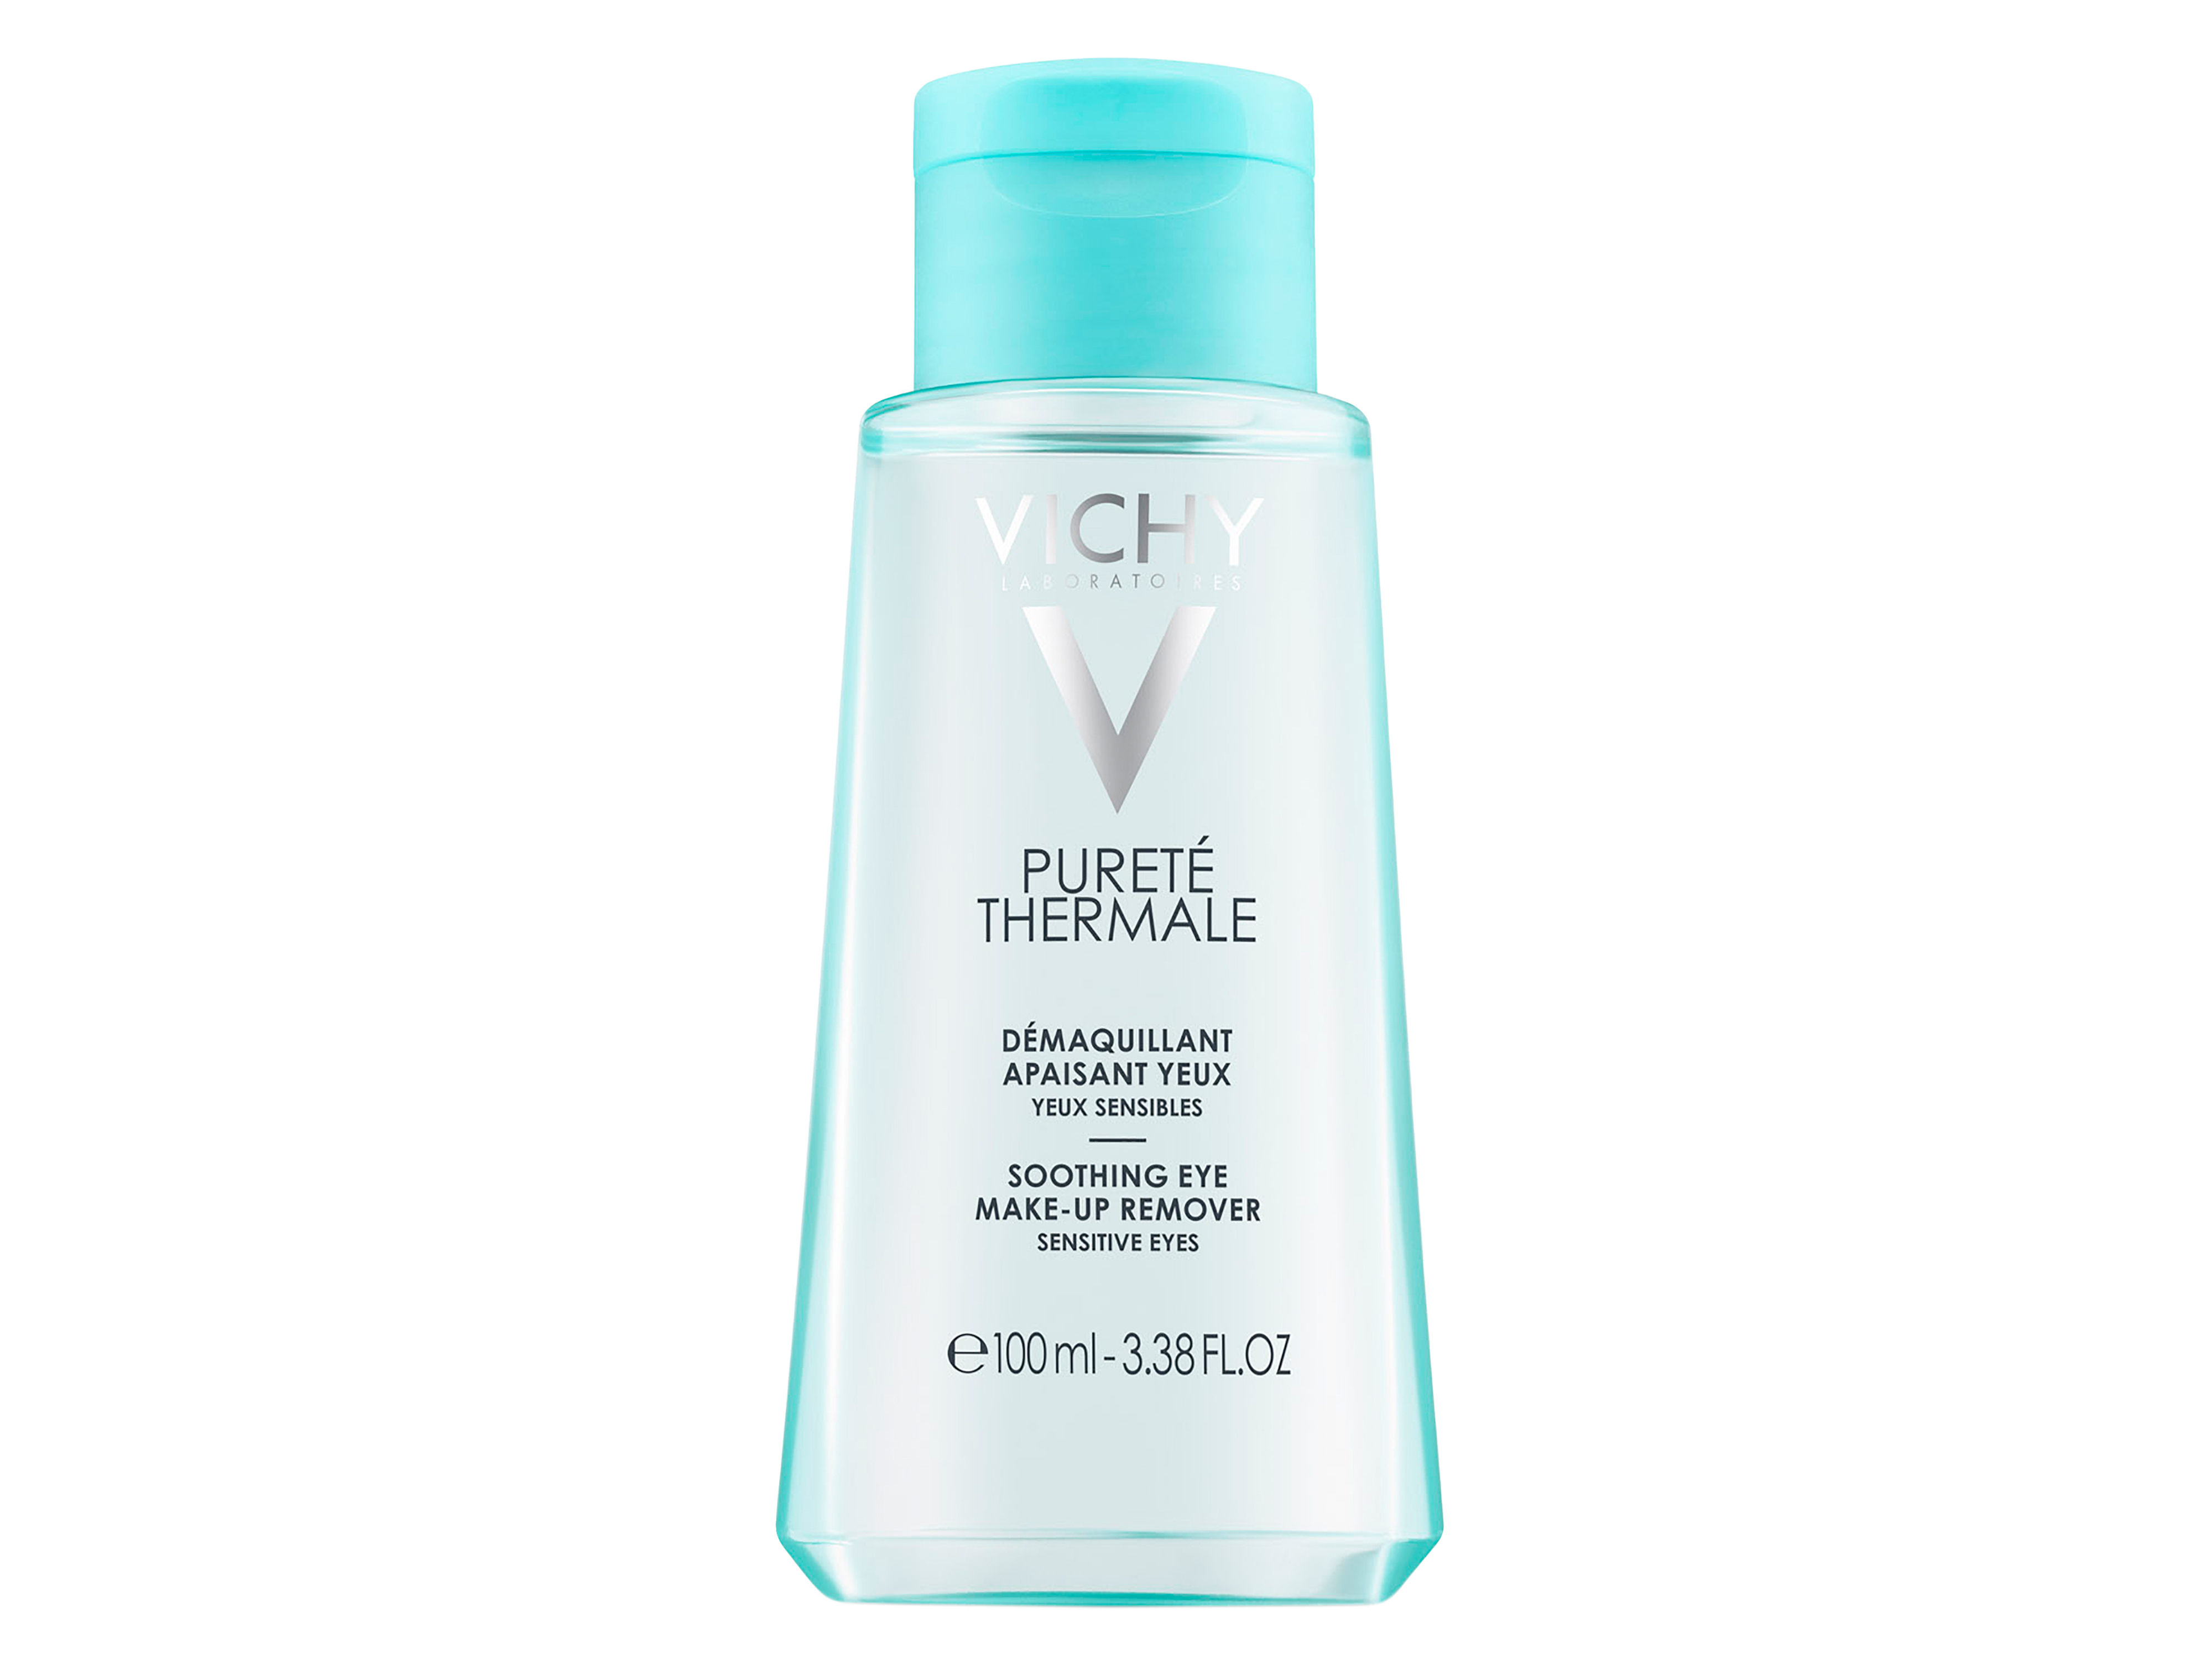 Vichy Purete Thermale Eye Makeup Remover, 100 ml